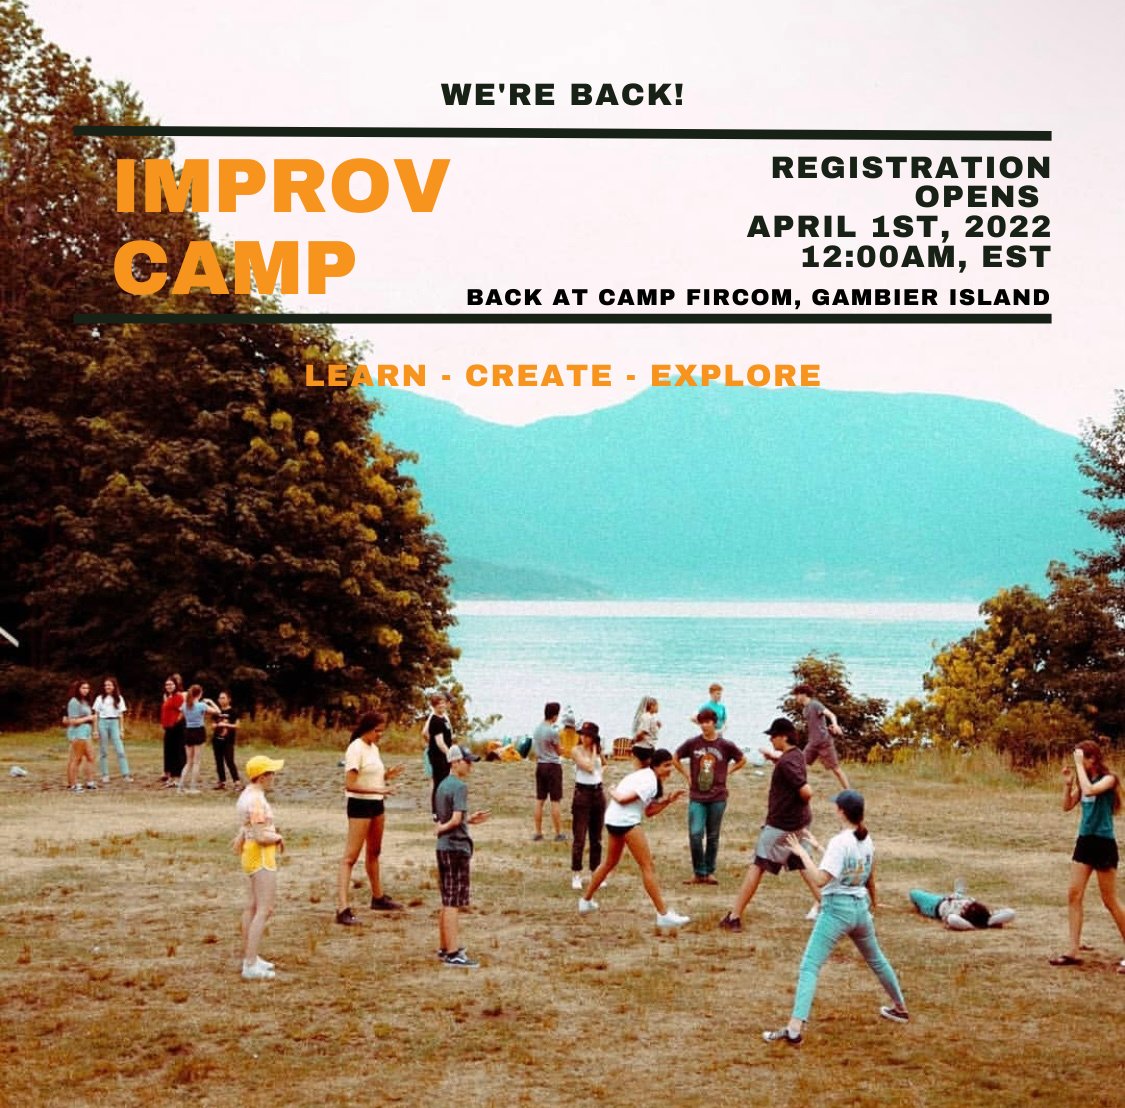 Pack your bags and get hyped for a summer of fun, on Gambier Island! We're going to camp and it's going to be a blast! ⛺️ #ImprovCamp2022 Registration opens April 1st! Keep your eyes peeled for your cue to make a move and snag your spot at camp!😎☀️